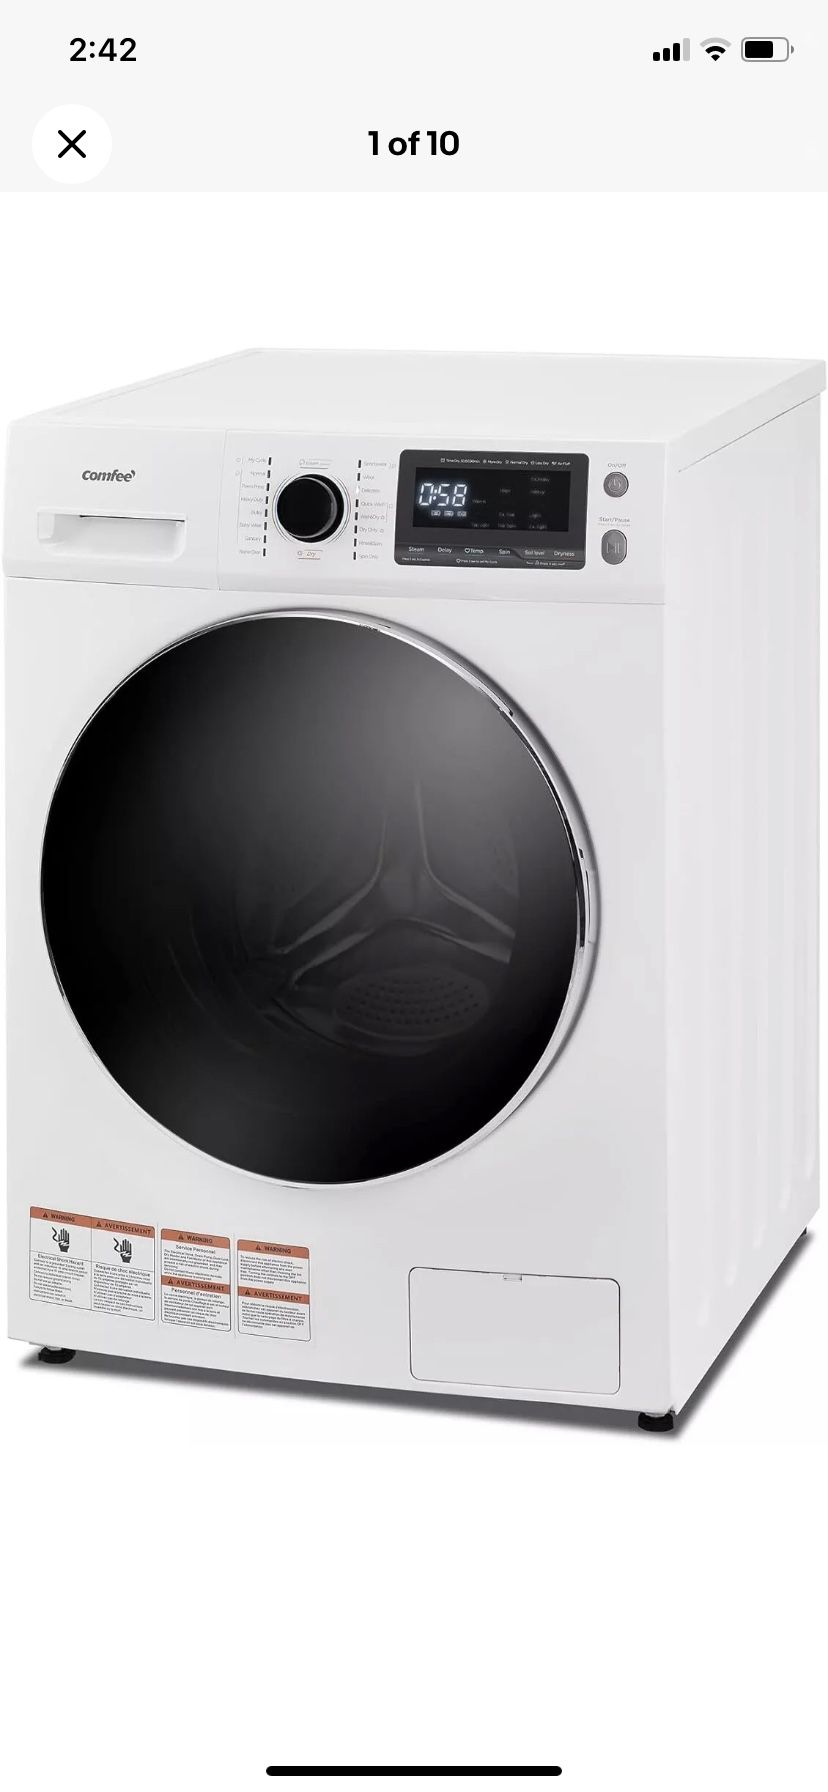 COMFEE’ 24" Washer and Dryer Combo 2.7 cu.ft 26lbs Washing Machine Steam Care, O